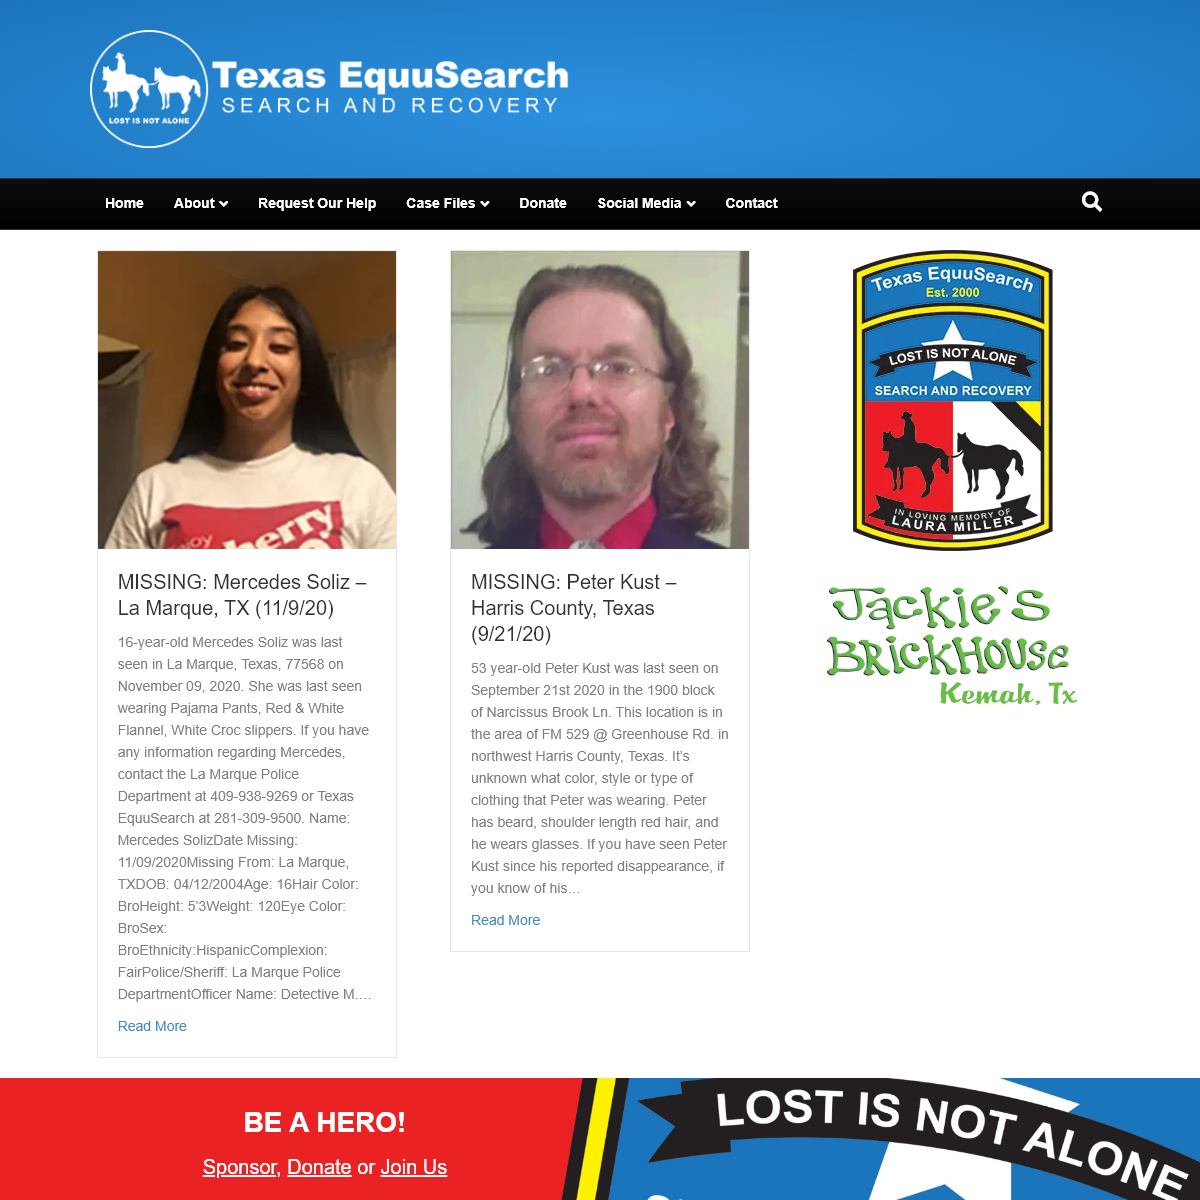 A complete backup of texasequusearch.org